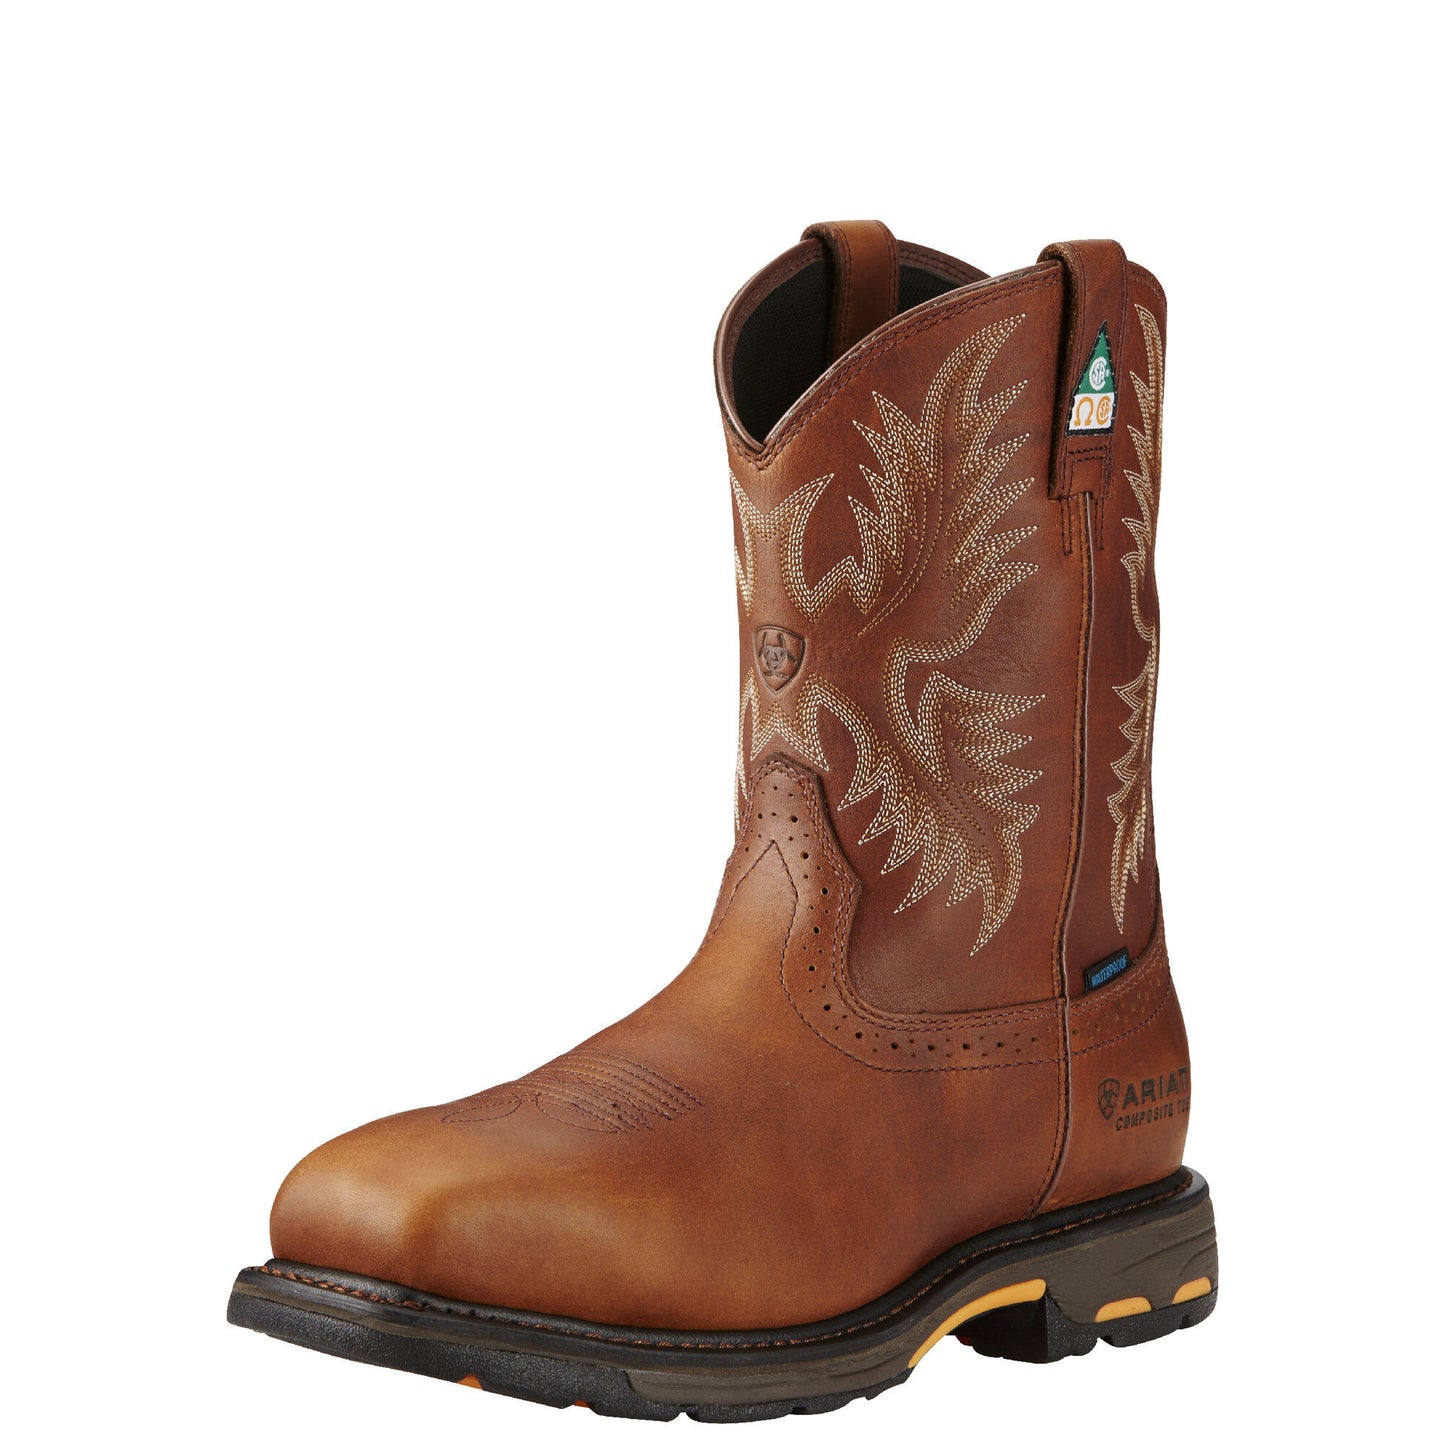 Ariat Men's WorkHog CSA H2O Composite Toe Boot - Dark Copper - French's Boots